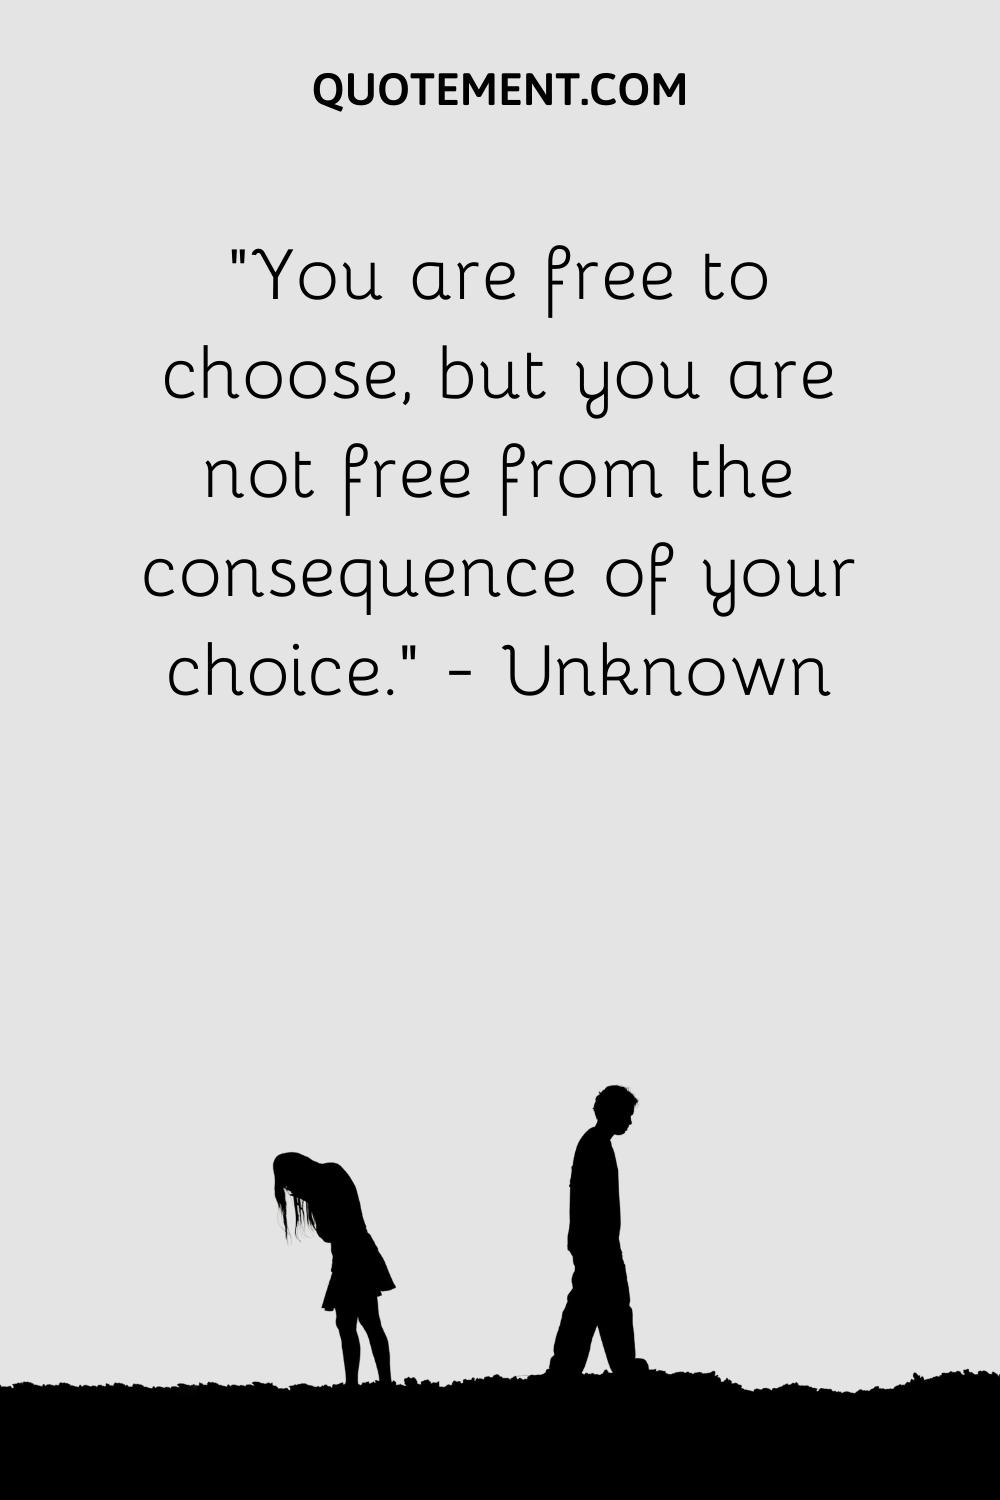 You are free to choose, but you are not free from the consequence of your choice